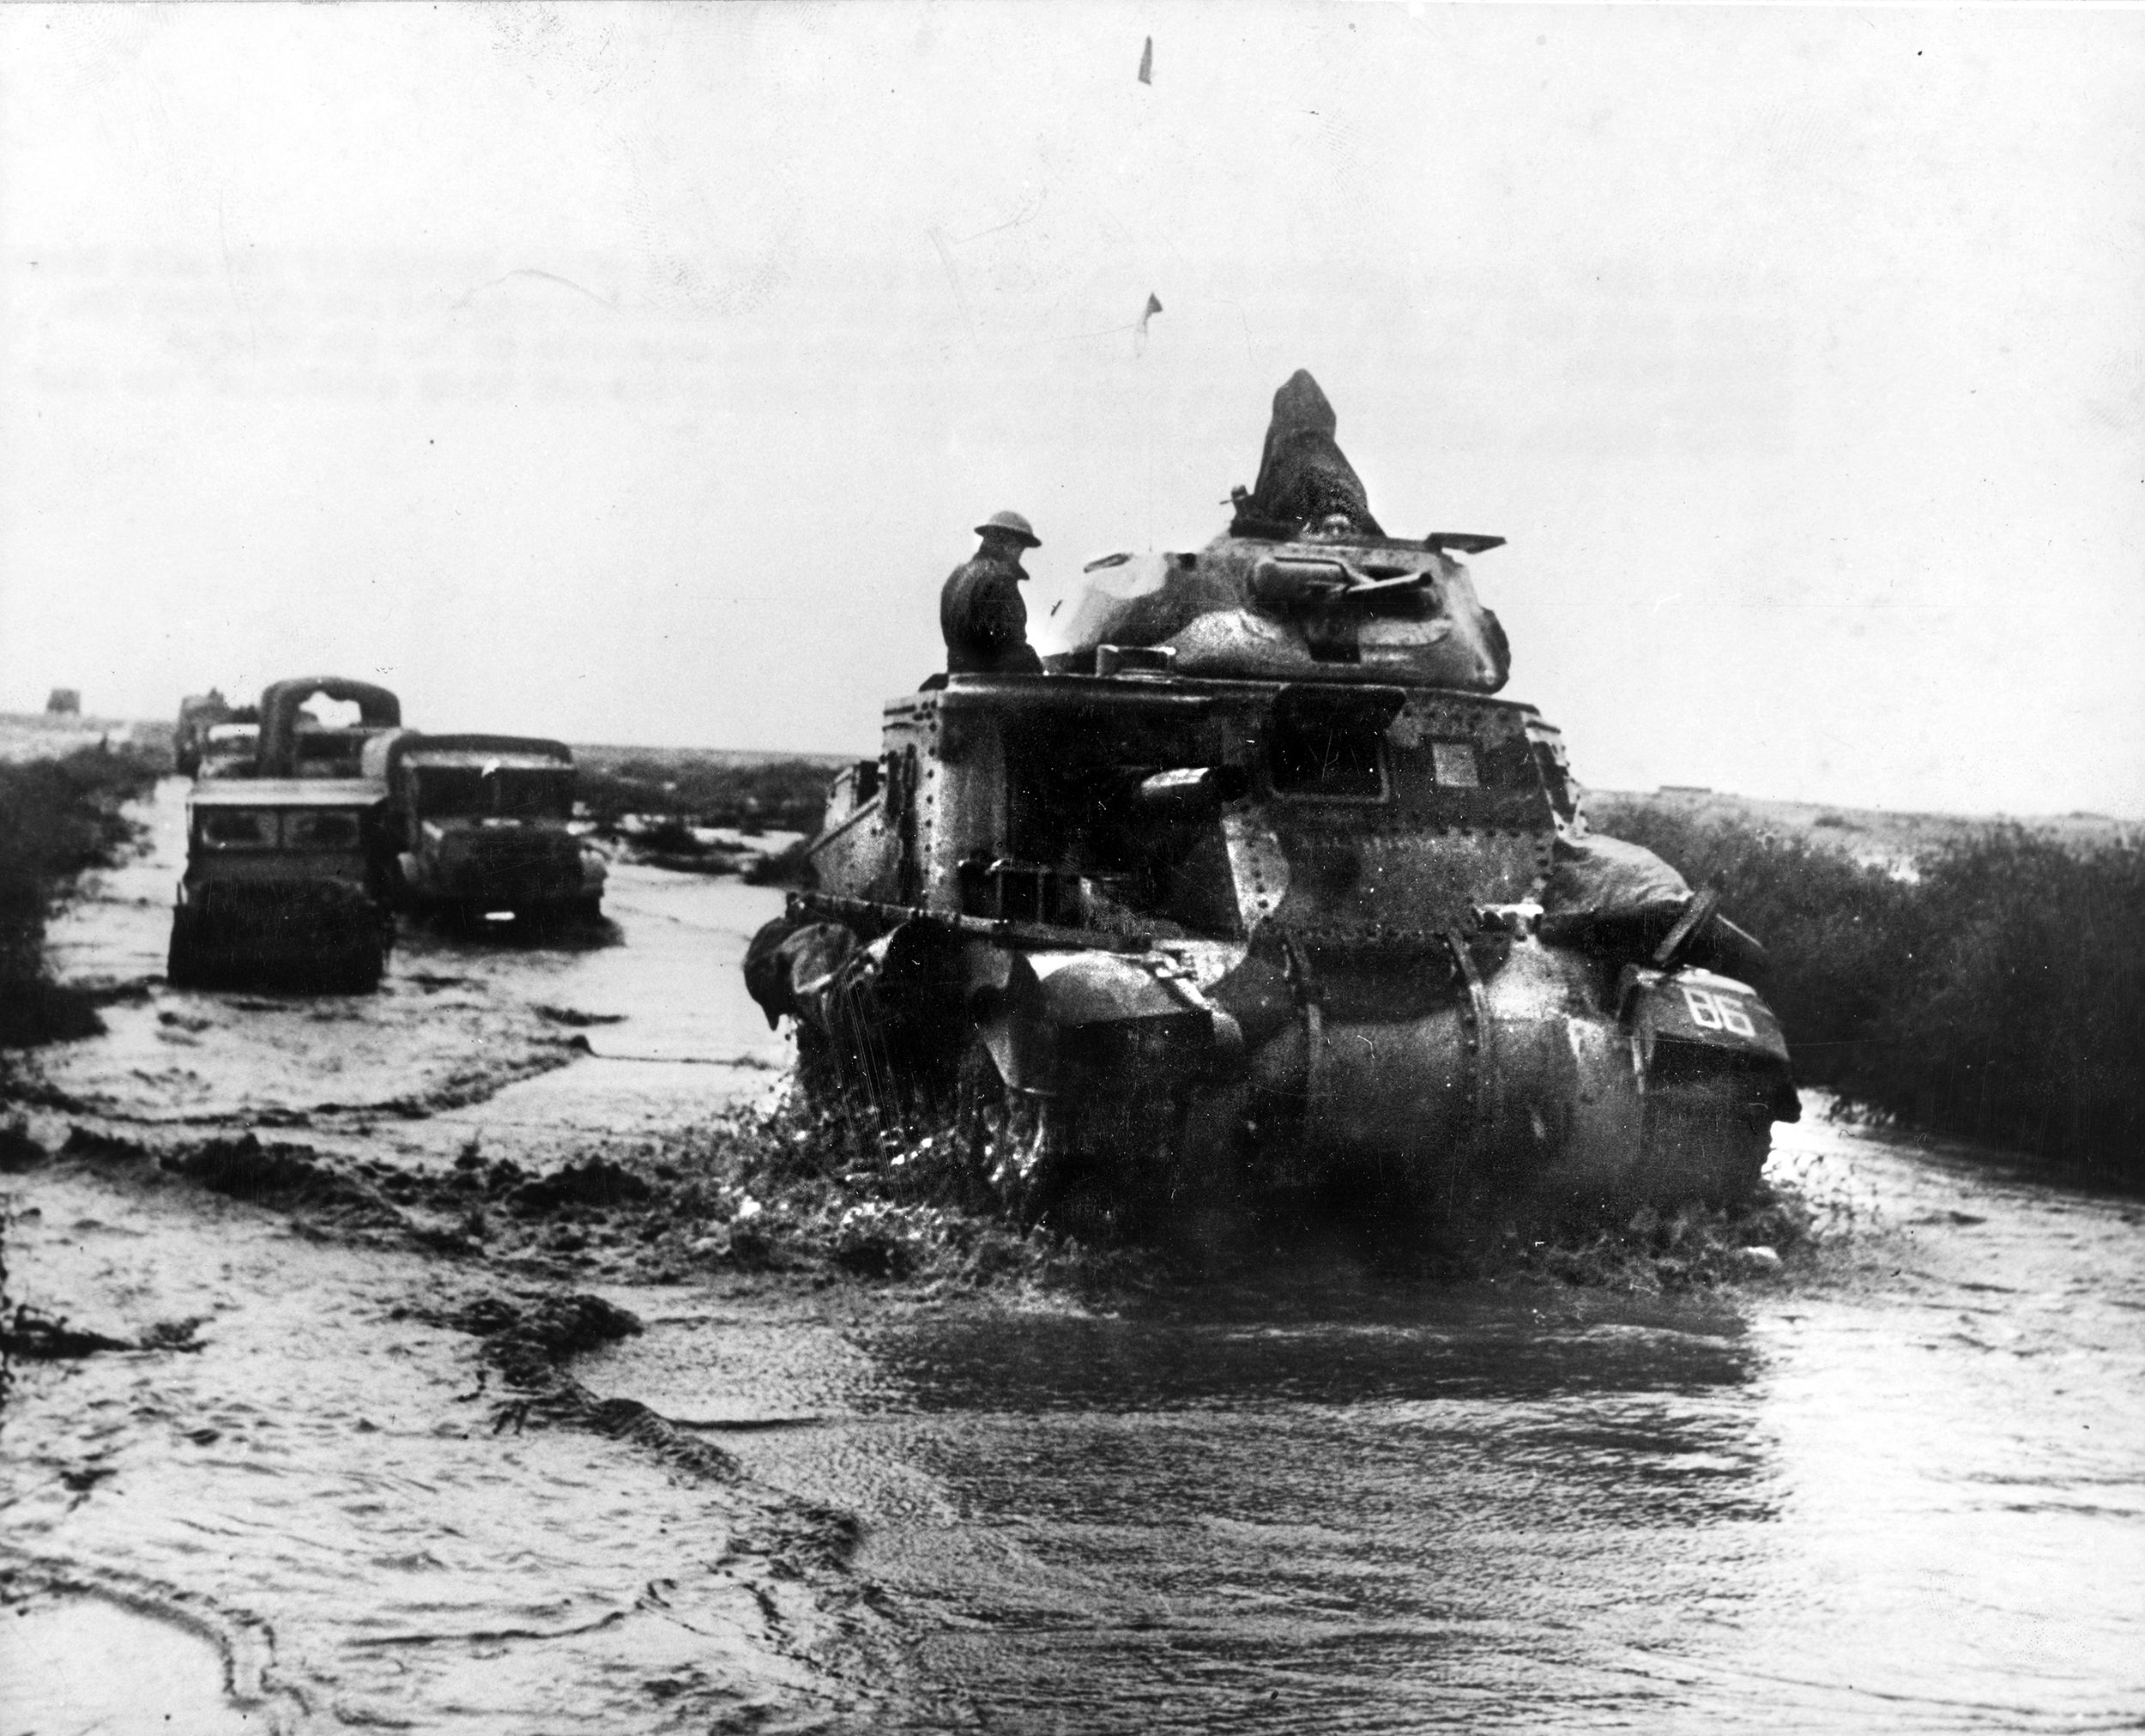 During fighting in North Africa, British troops ride through heavy rain and mud across the Libyan landscape. Their Grant tank mounts a 37mm gun in a small turret and a sponson mounted 75mm gun.